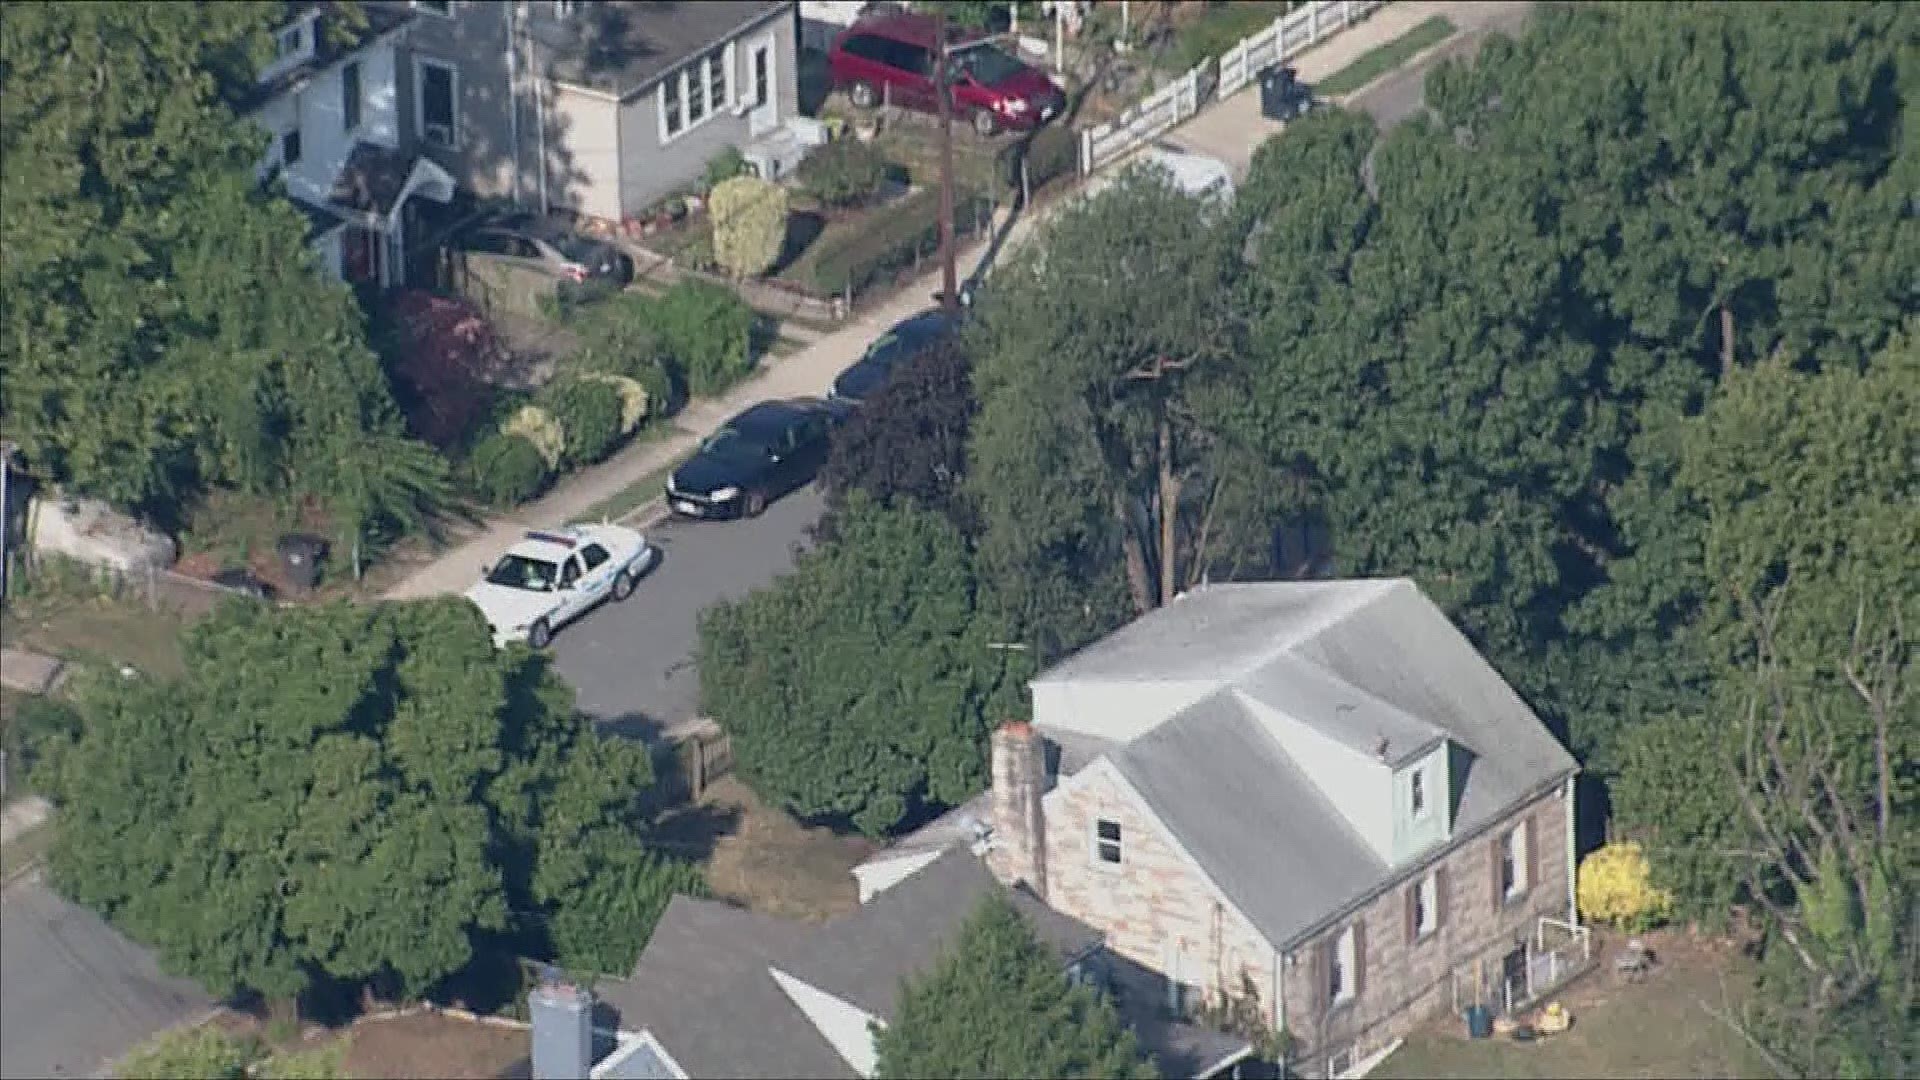 Police are investigating after a man was found dead in Hyattsville, Maryland.